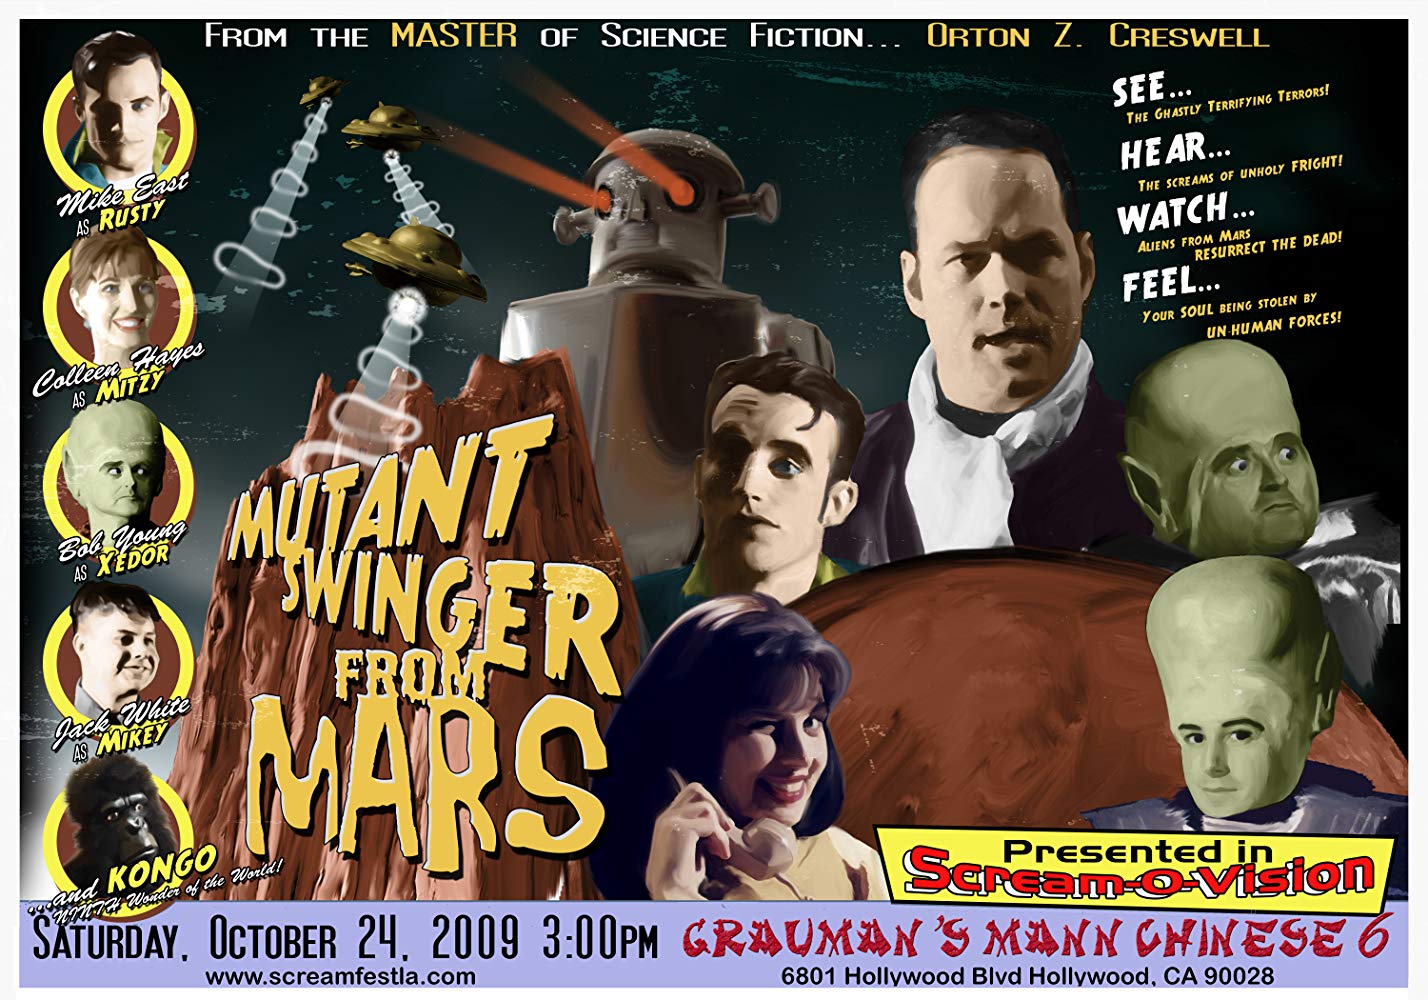 Double reccomend The mutant swinger from mars